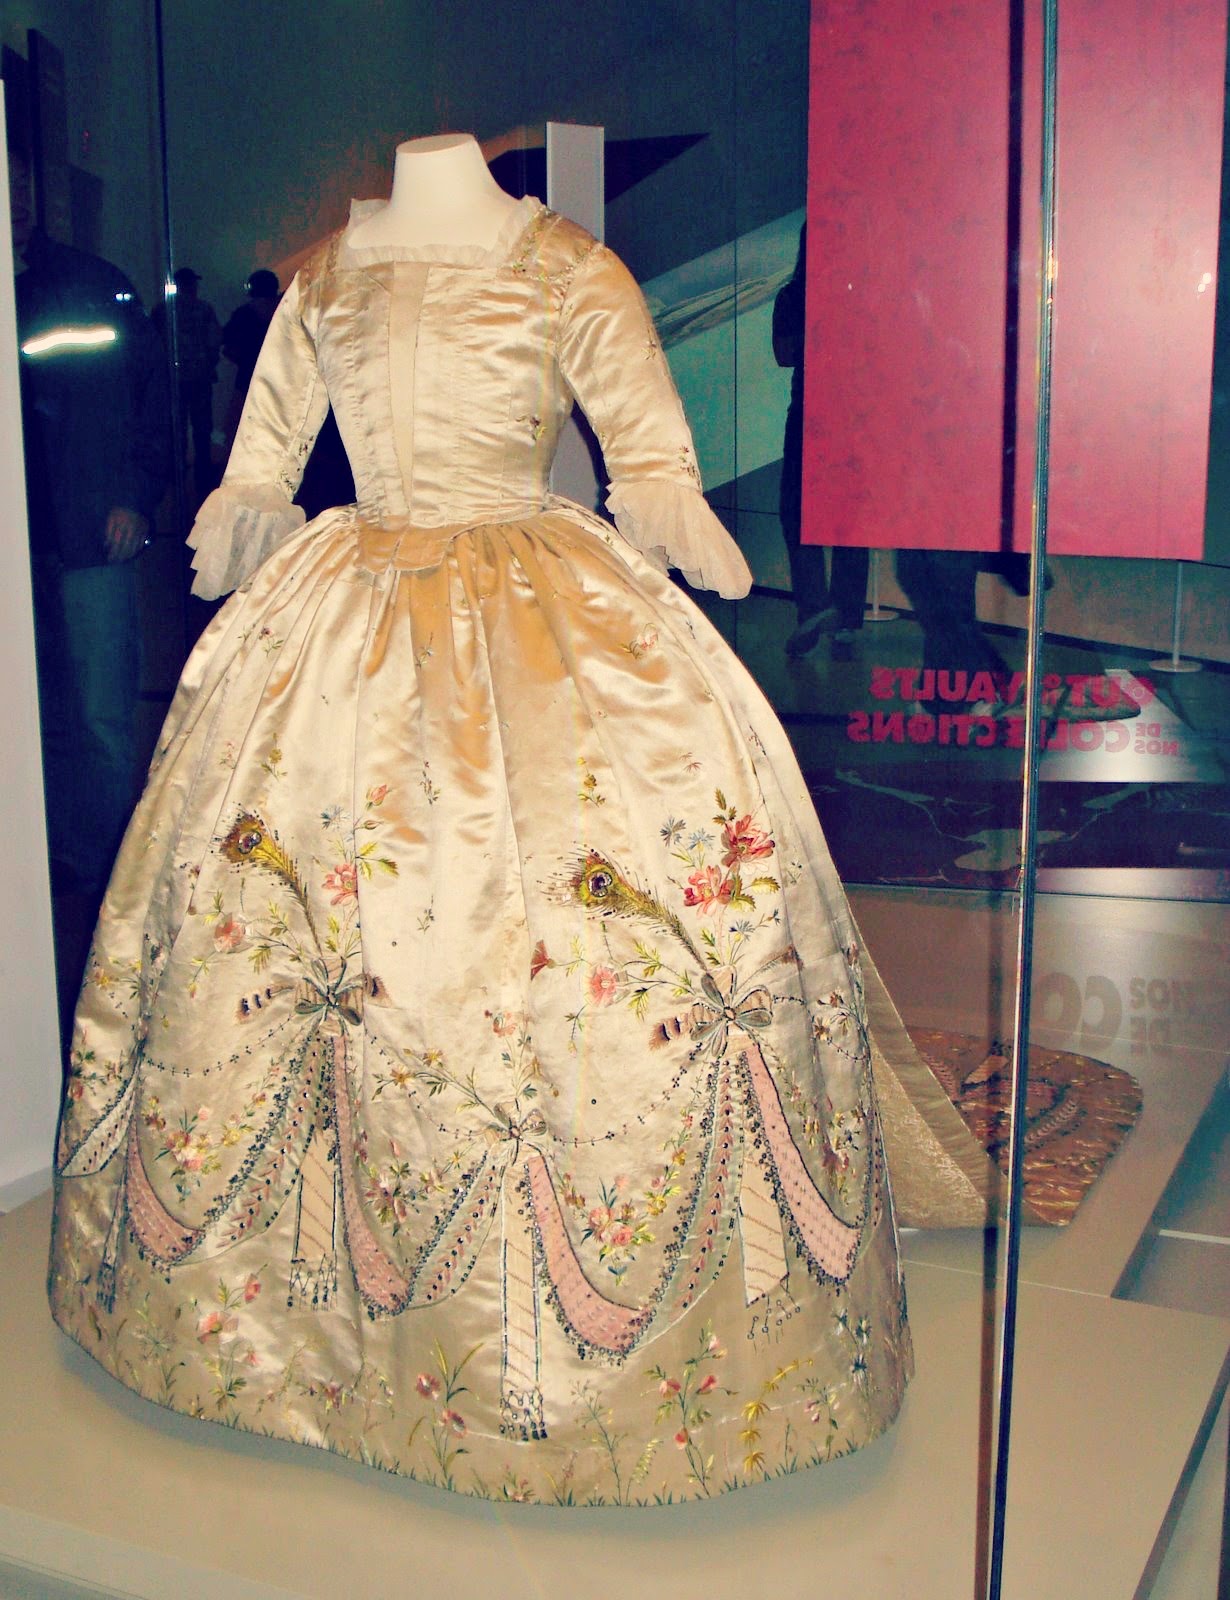 Marie Antoinette's: Hello Gorgeous! A Rose Bertin Gown in Canada